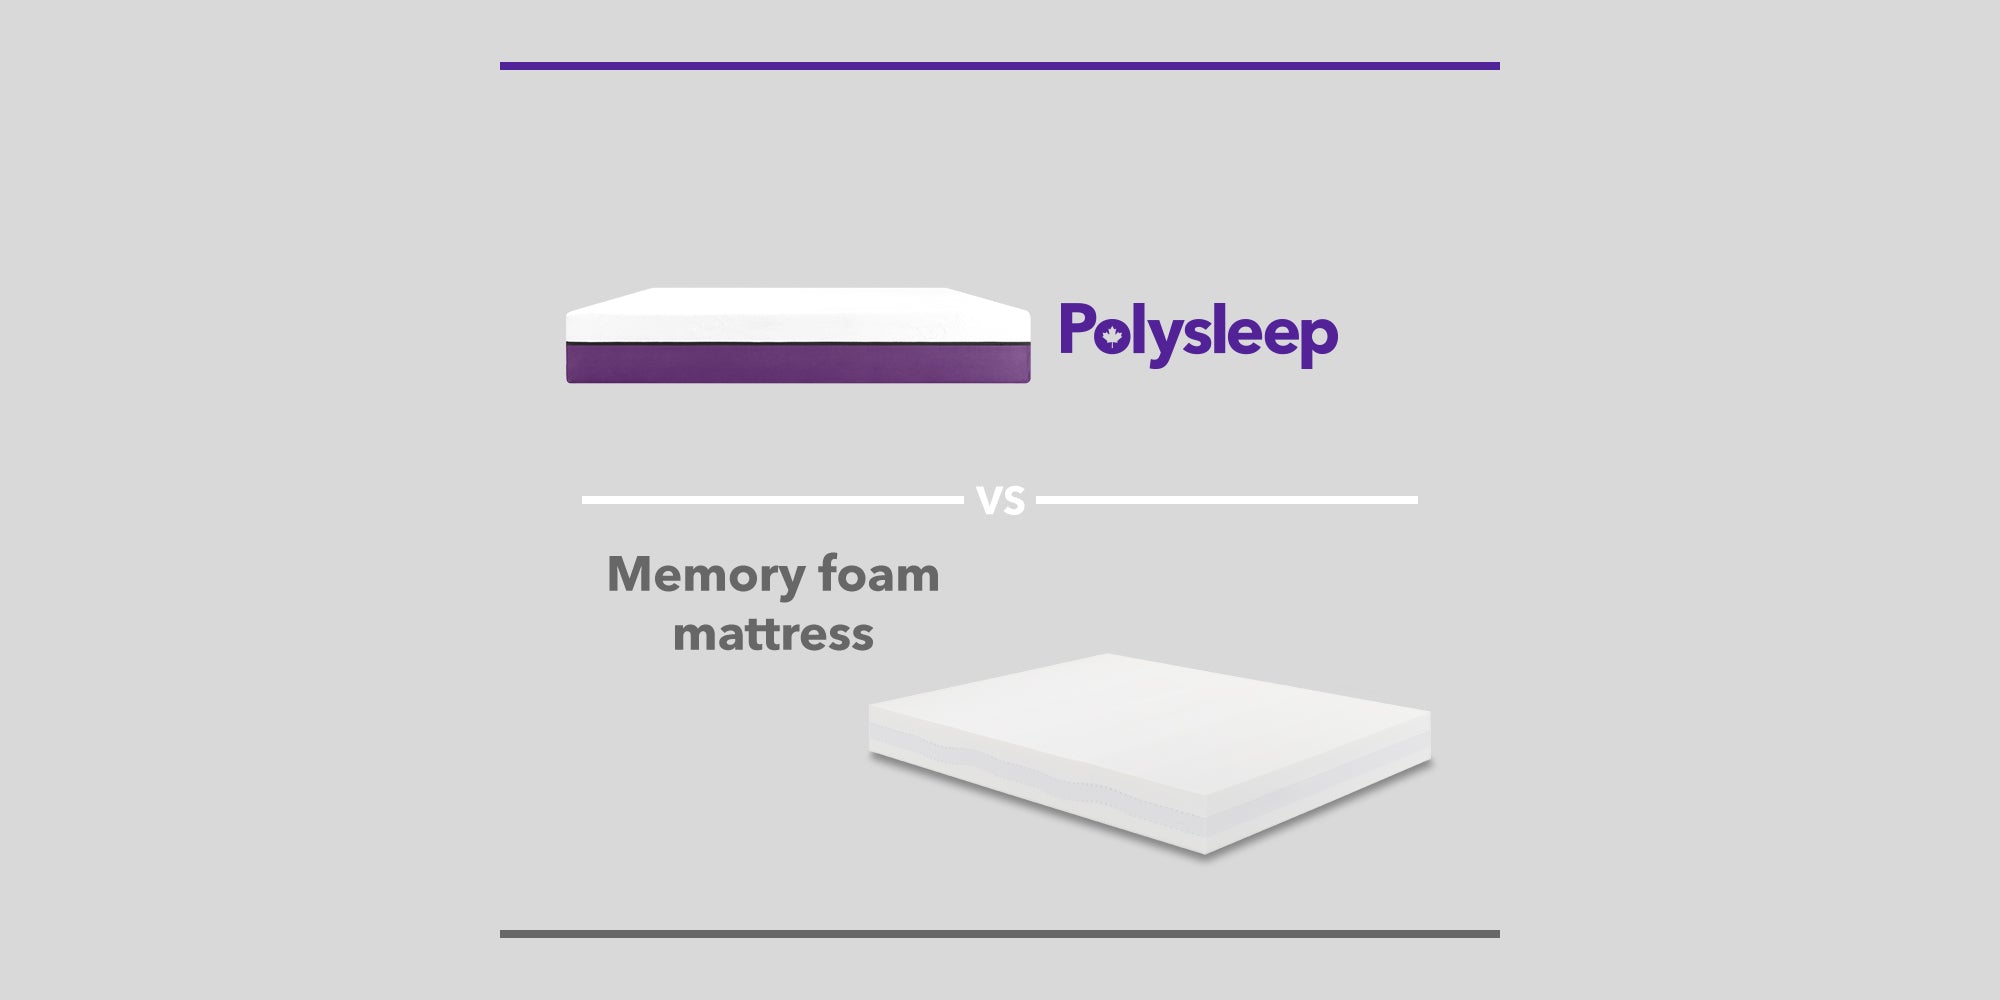 What are the differences between a memory foam mattress and the Polysleep mattress?